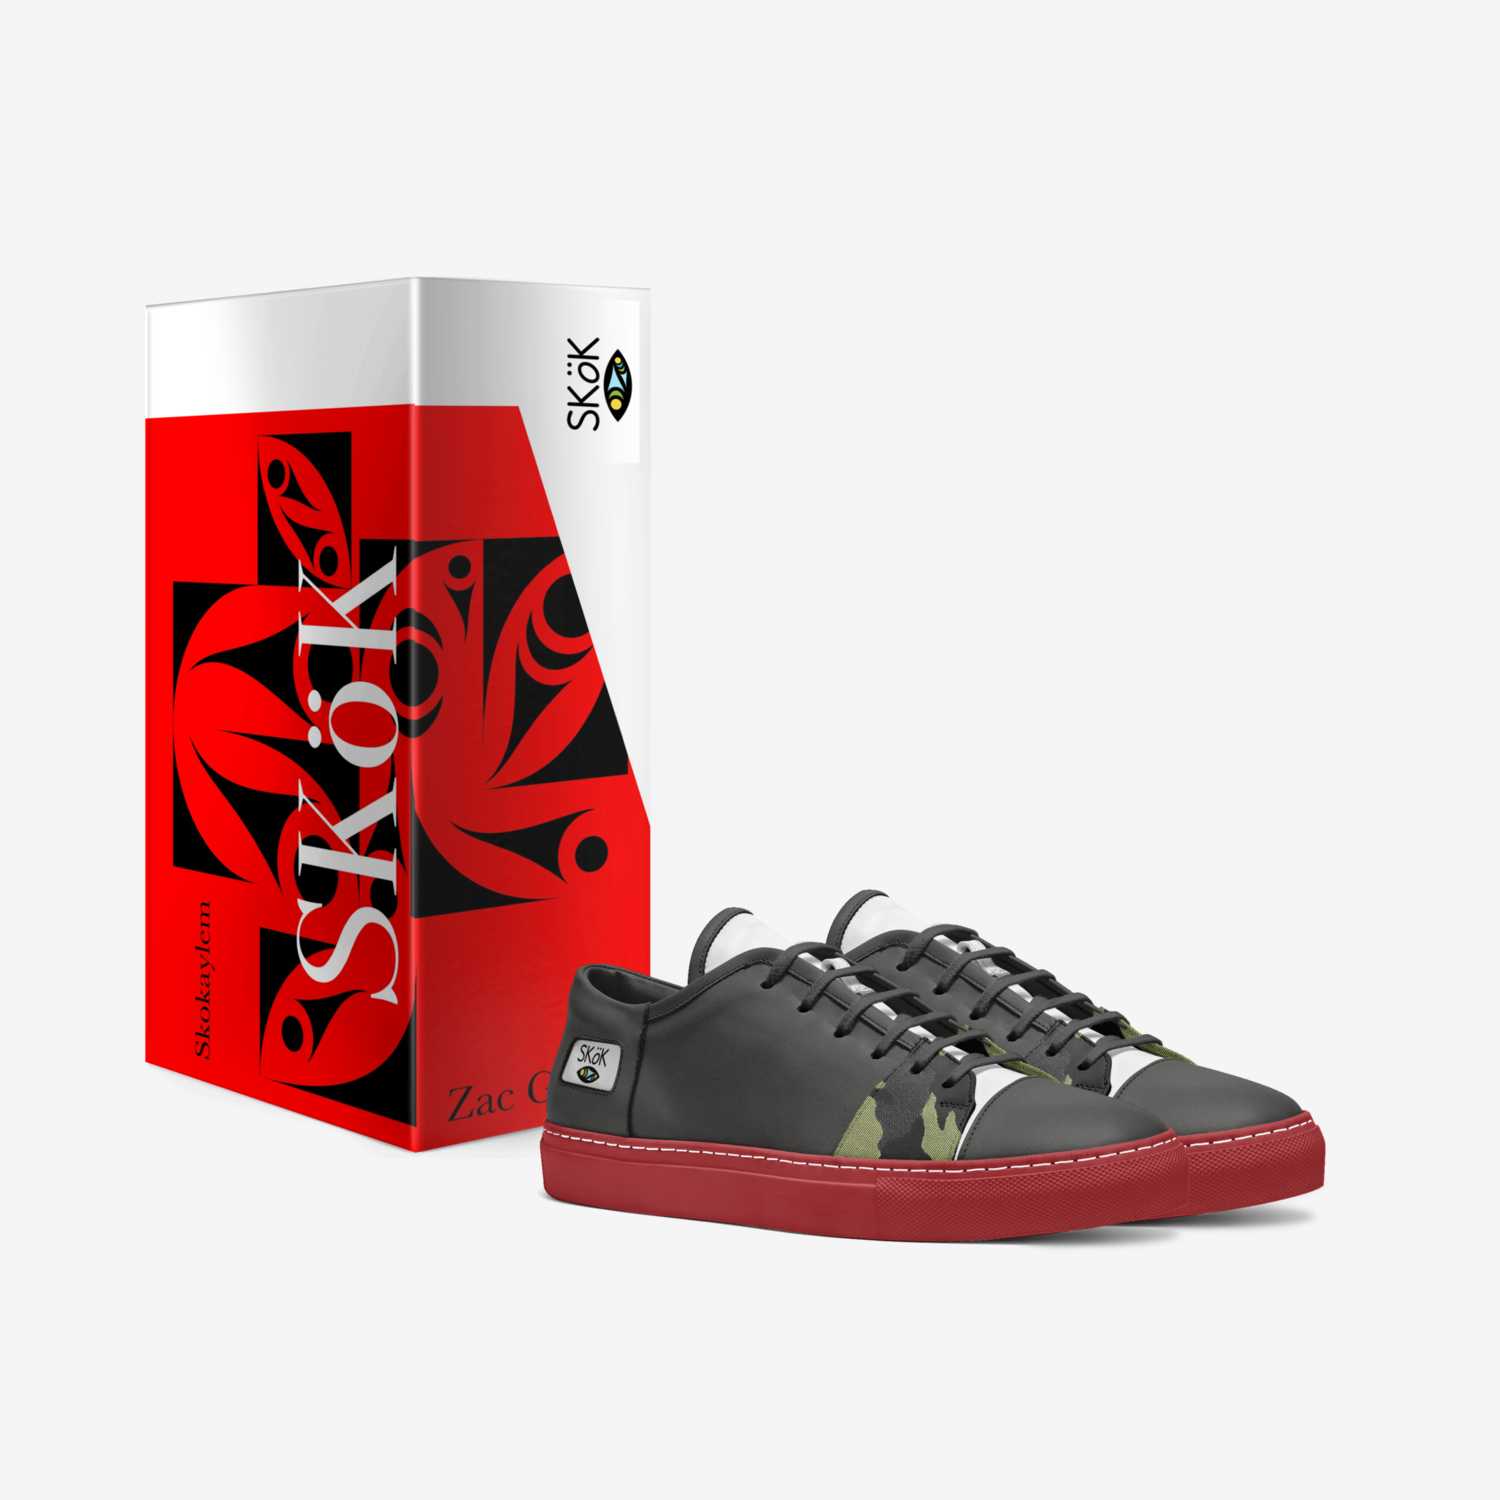 SKöK custom made in Italy shoes by Zachary George | Box view